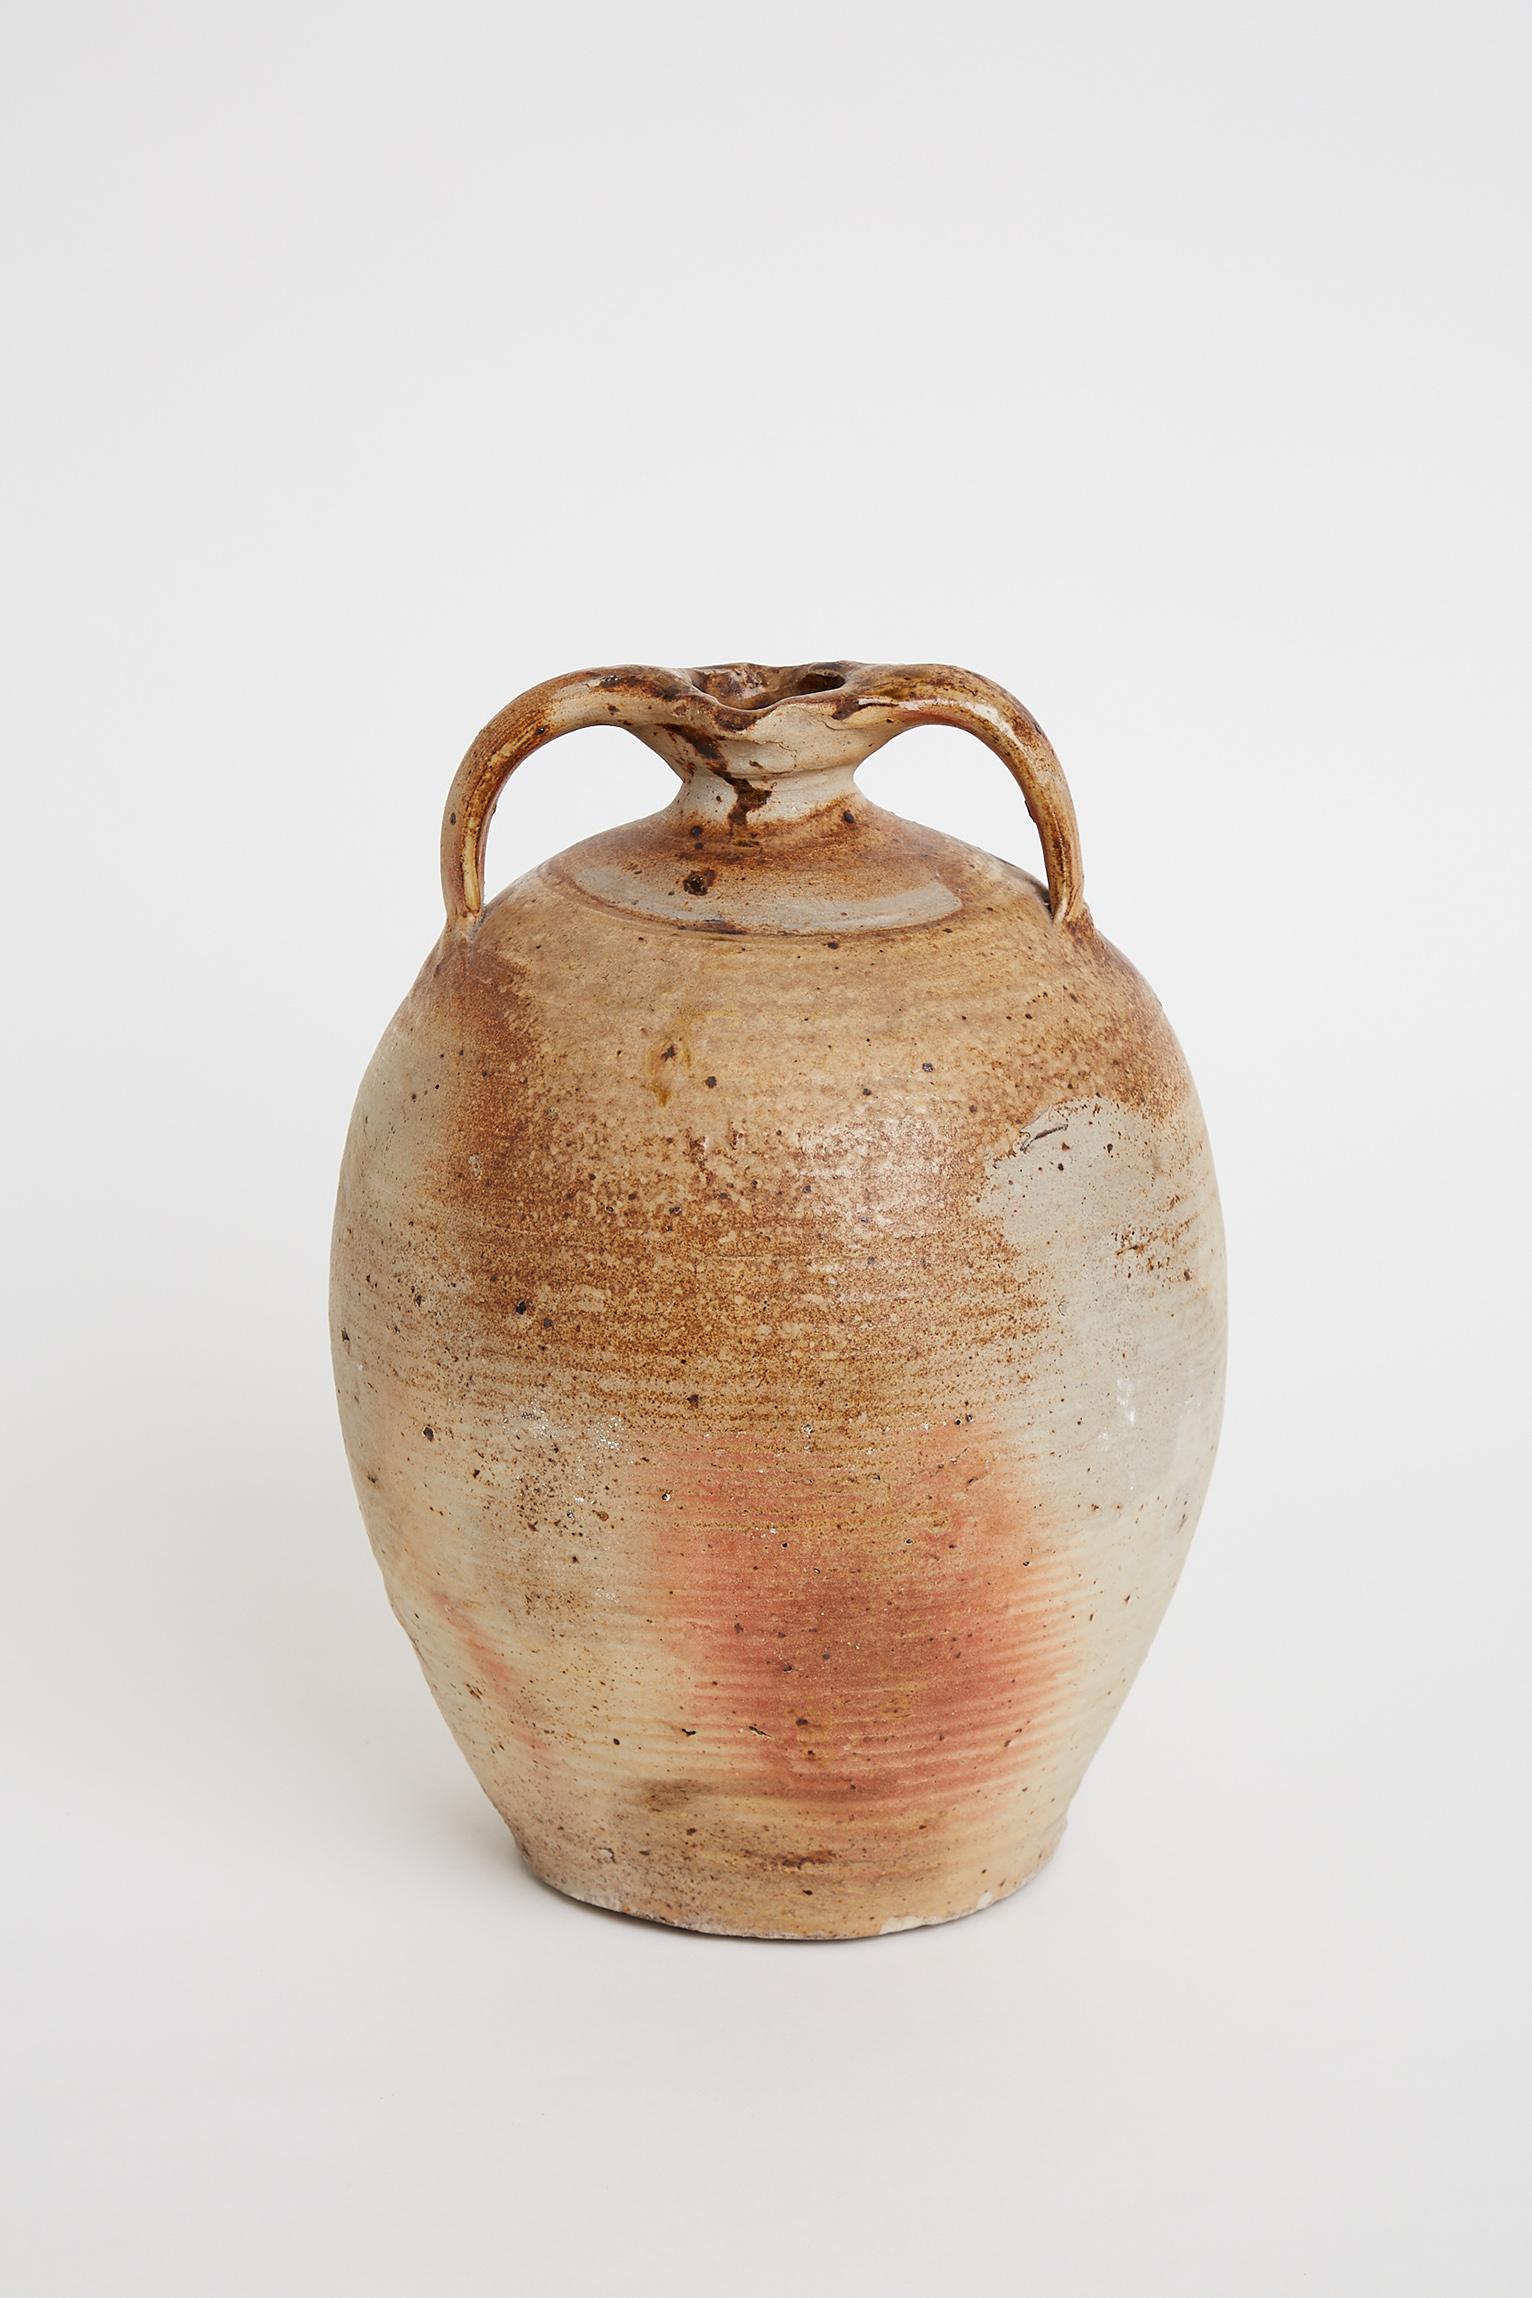 A large grès de Puisaye stoneware 'bombonne' jar, elegantly shaped and with two handles, partially ash enameled, the surface superbly marked by the firing.
La Borne, Berry, France. 19th century, possibly earlier.